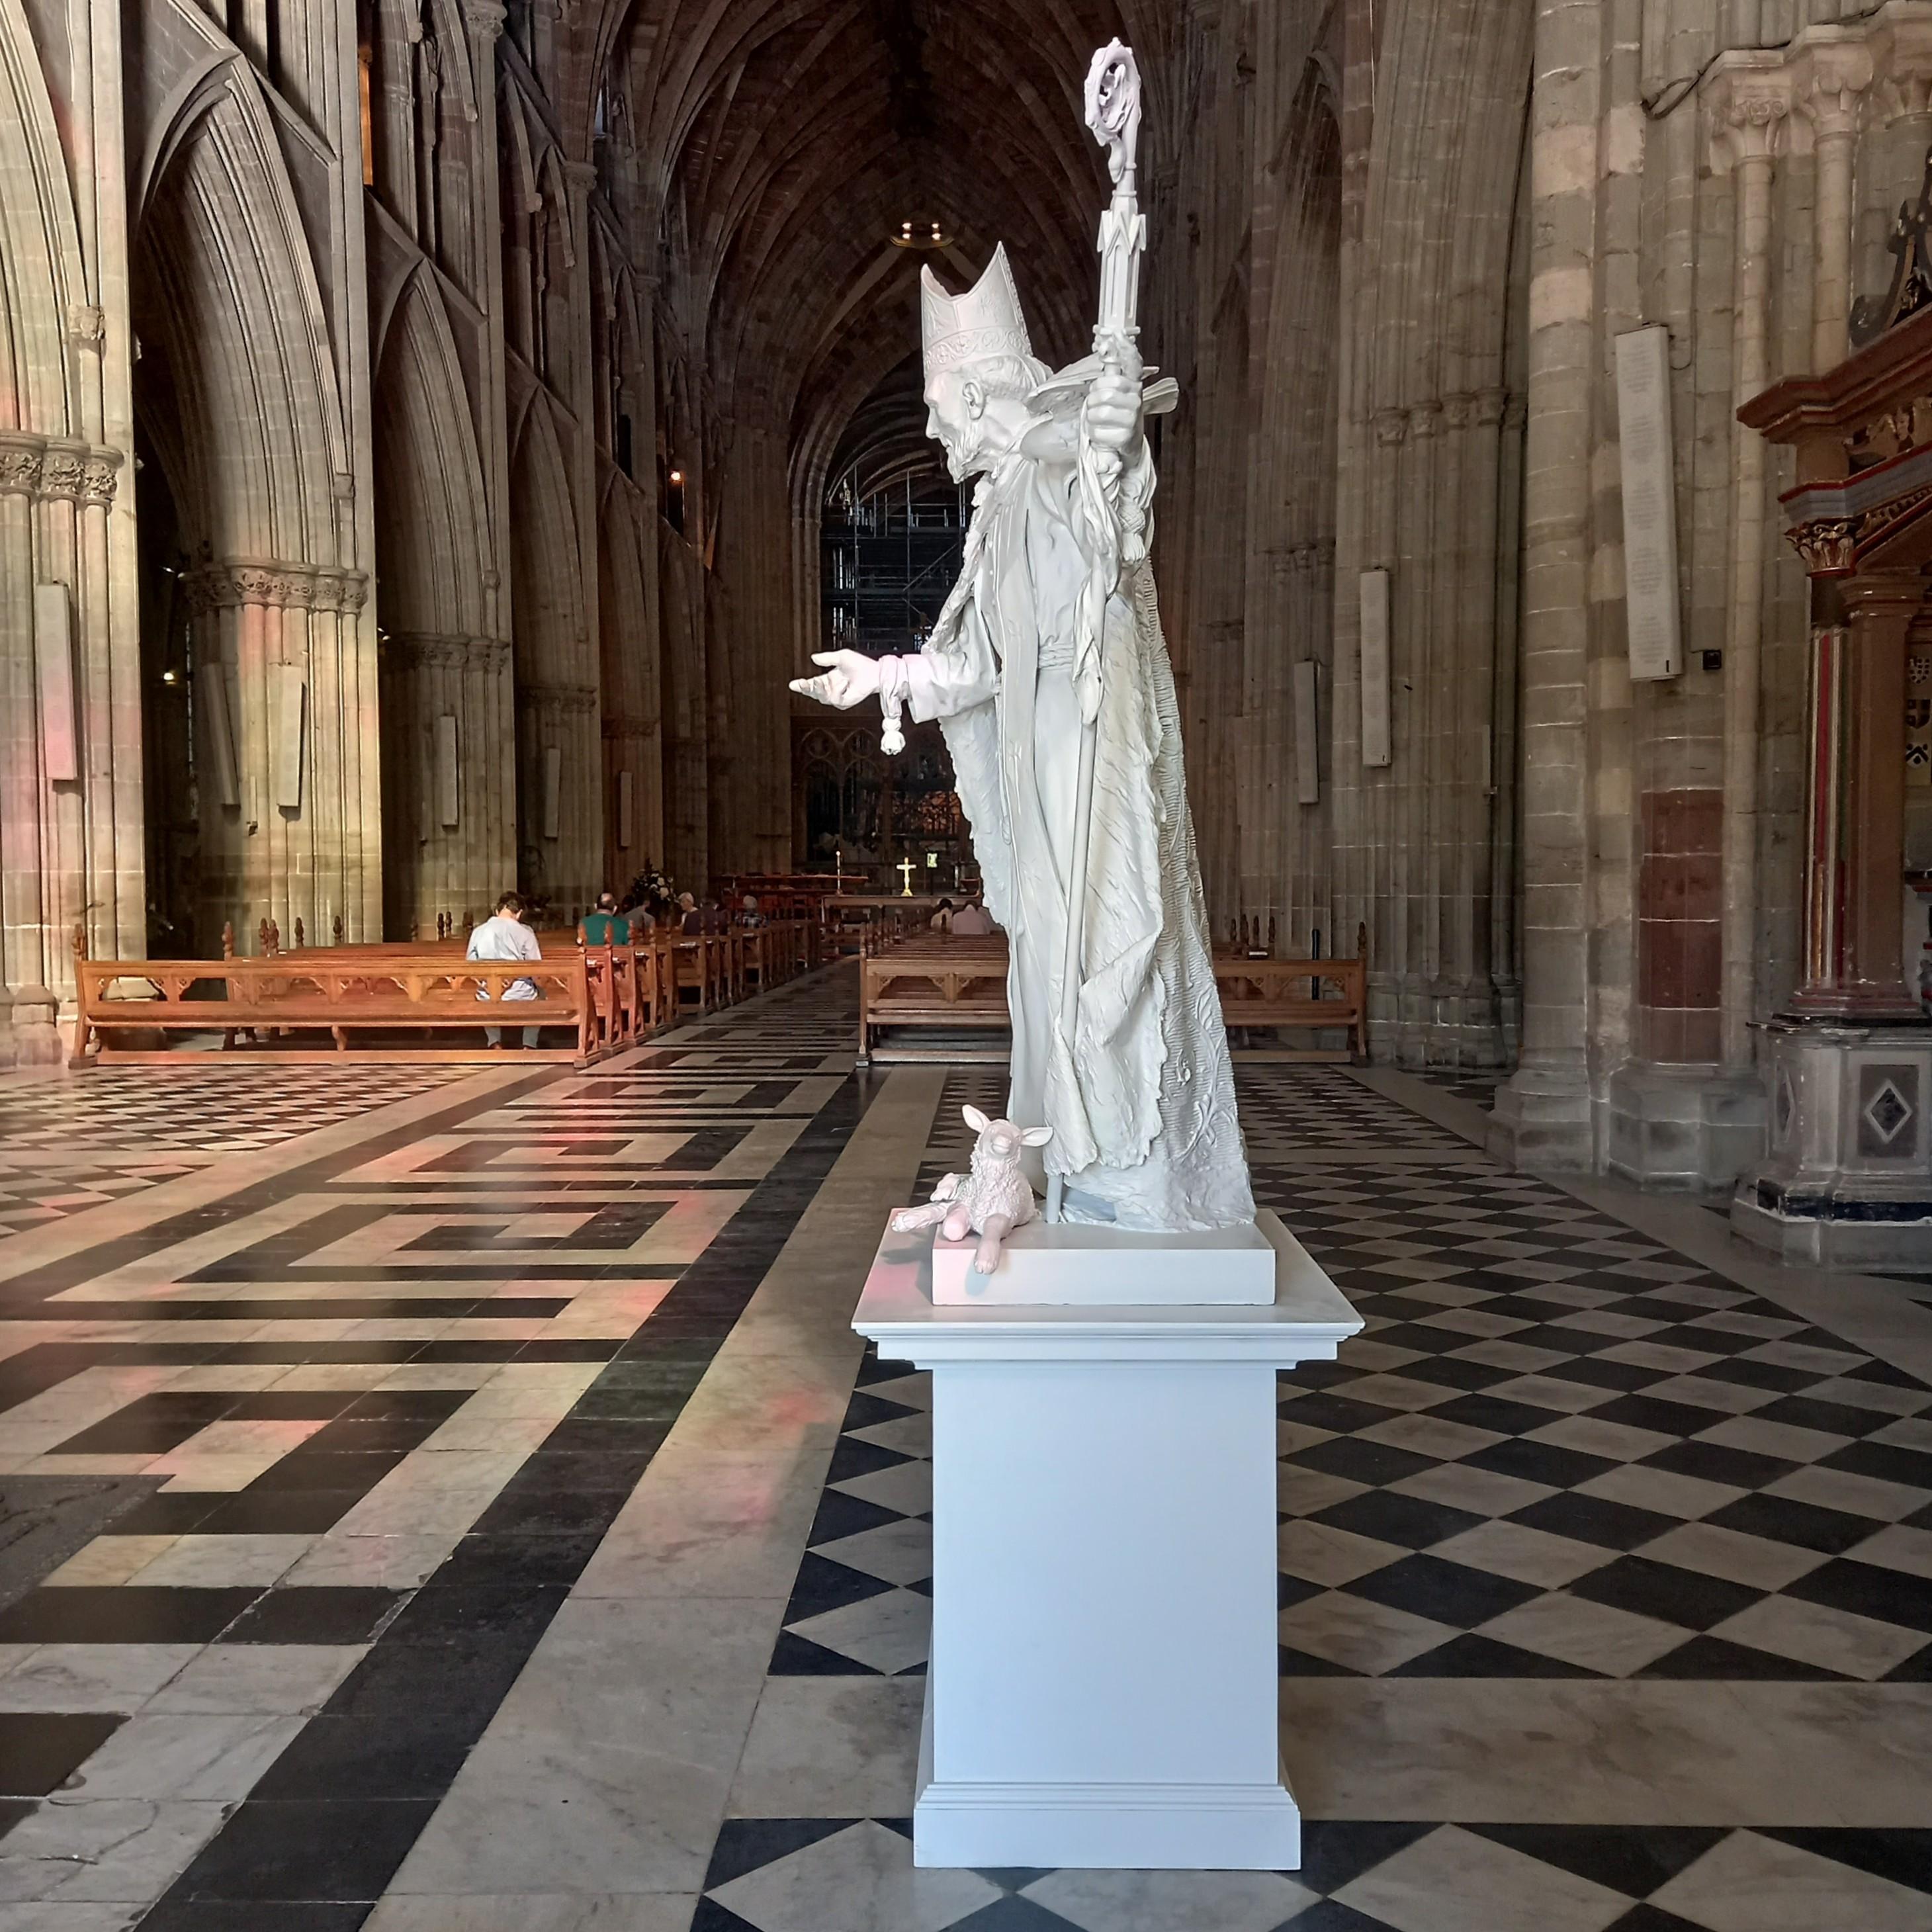 This statue of Saint David, the Patron Saint of Wales stands 150cm high and is depicted with historical accuracy. Davies created this statue following extensive and thorough research into the life of the 6th Century Saint. Every element depicted